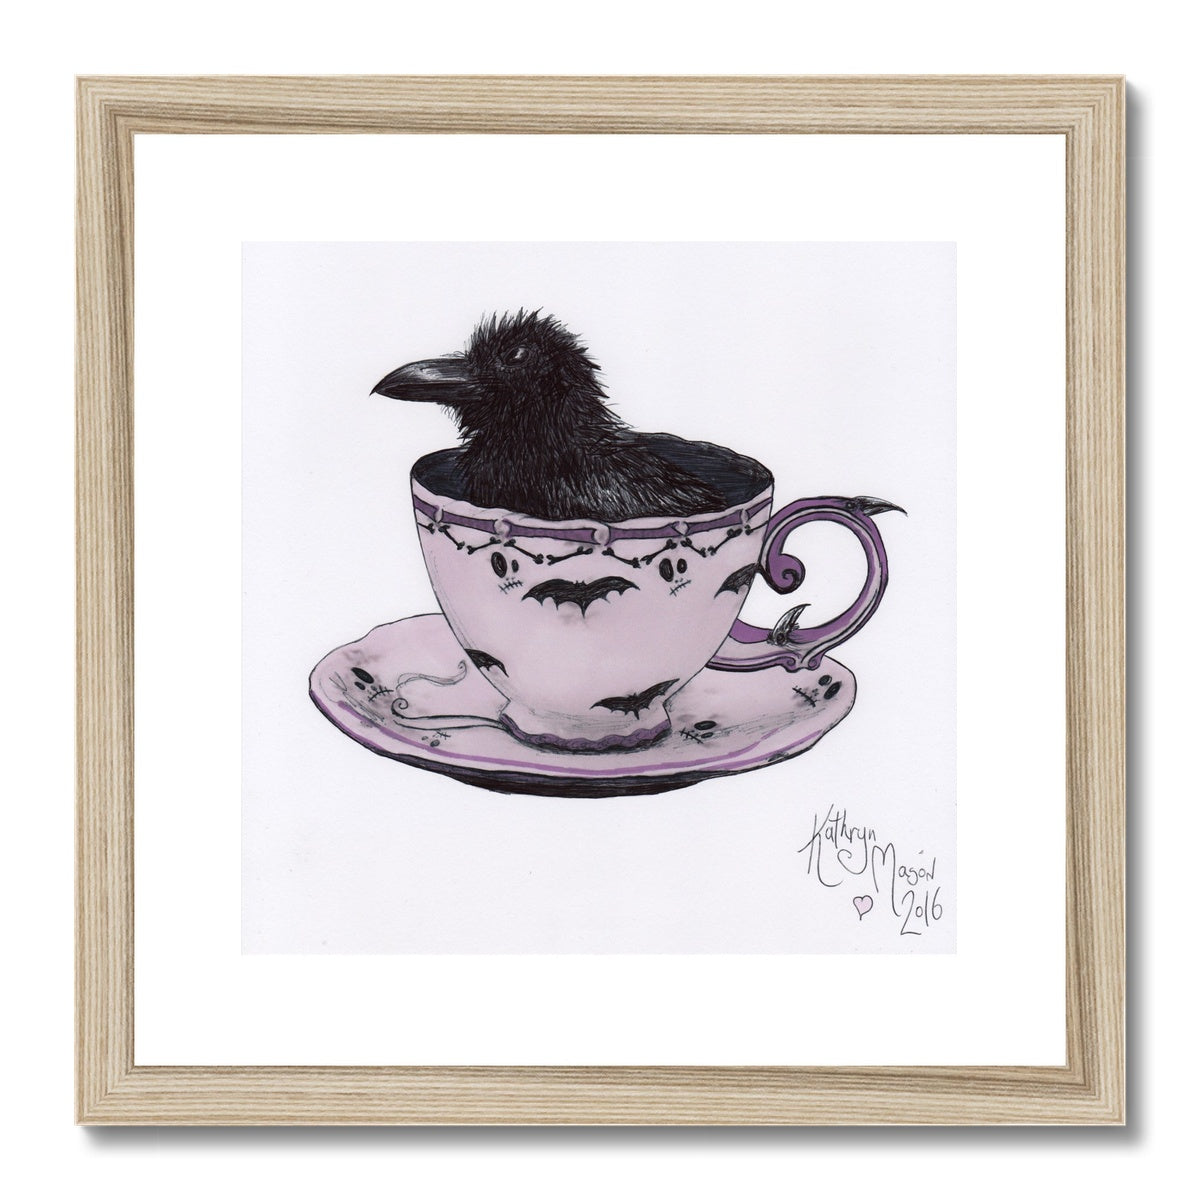 Photo showing 'Sheltering from a Storm in a Teacup' Cute Baby Crow Gothic Fine Art Print from artist Kathryn Mason's original drawing. Framed and Mounted. Shown here with wood frame.